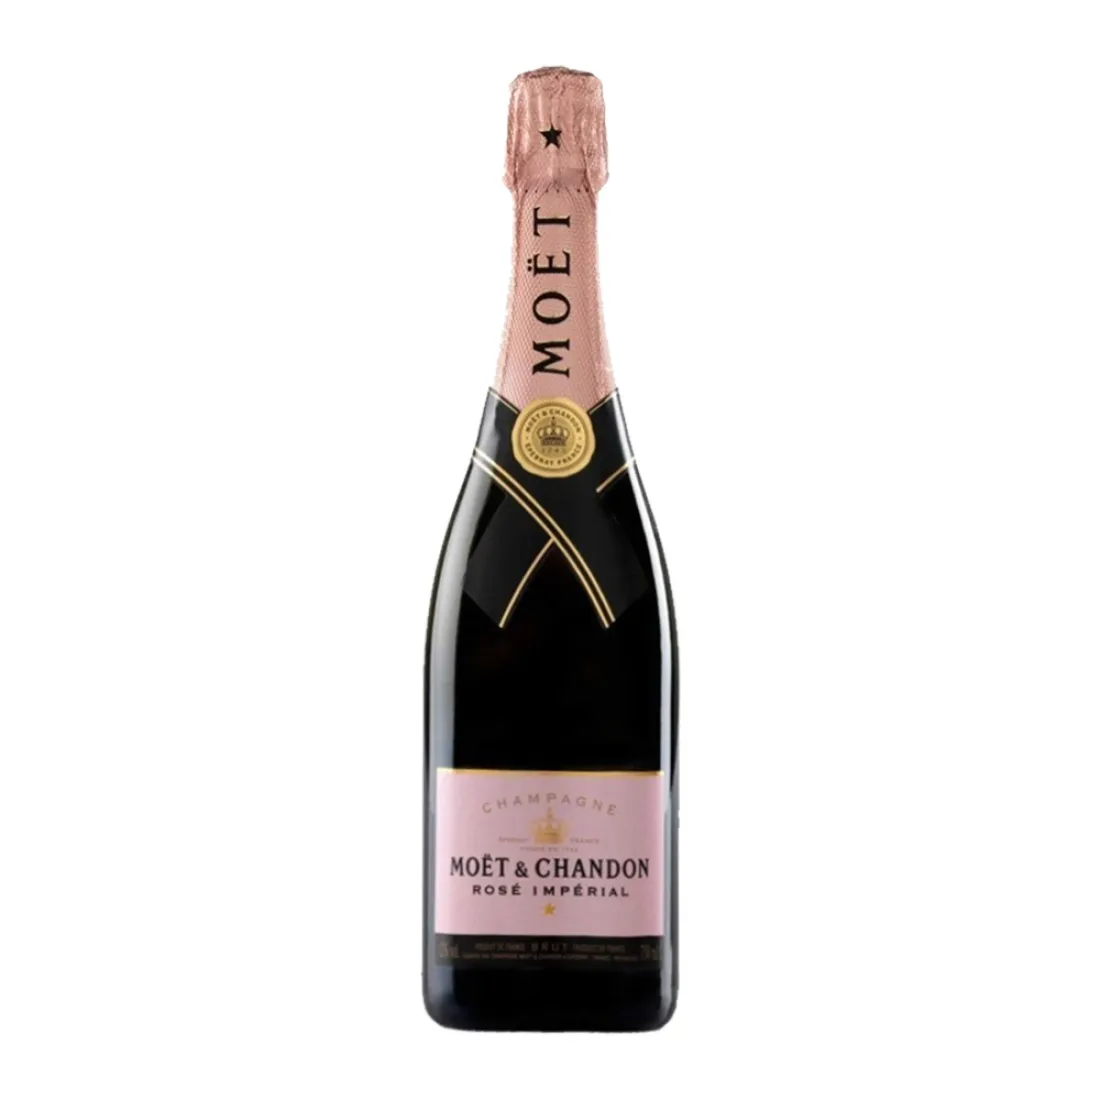 https://www.wineandchampagnegifts.com/image/cache/catalog/champagne/Moet-and-Chandon-rose-imperial-1100x1100.webp